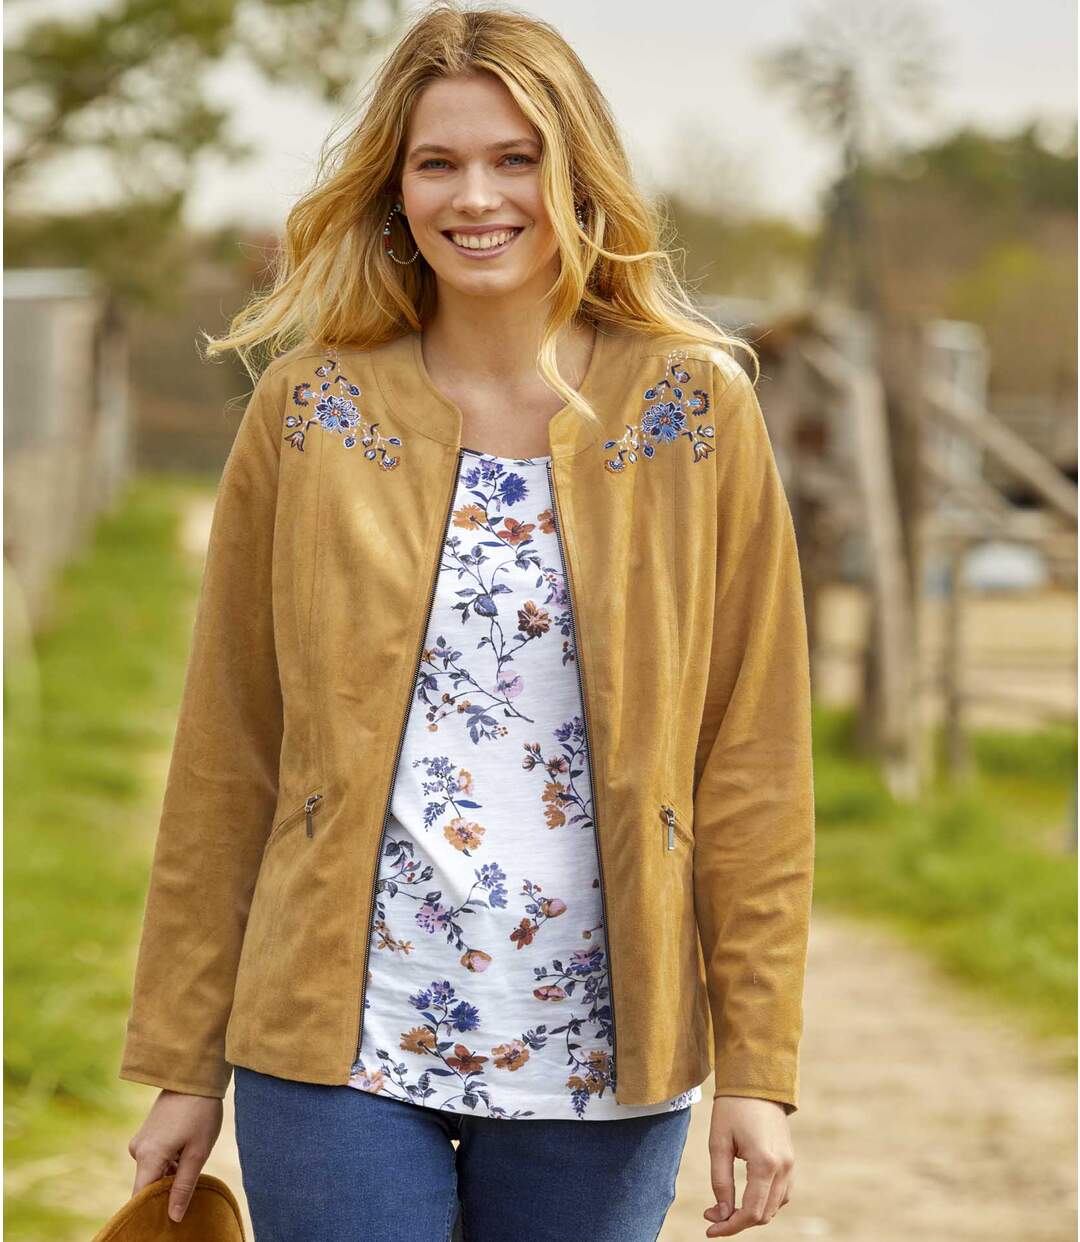 Women's Embroidered Faux Suede Jacket - Camel Atlas For Men